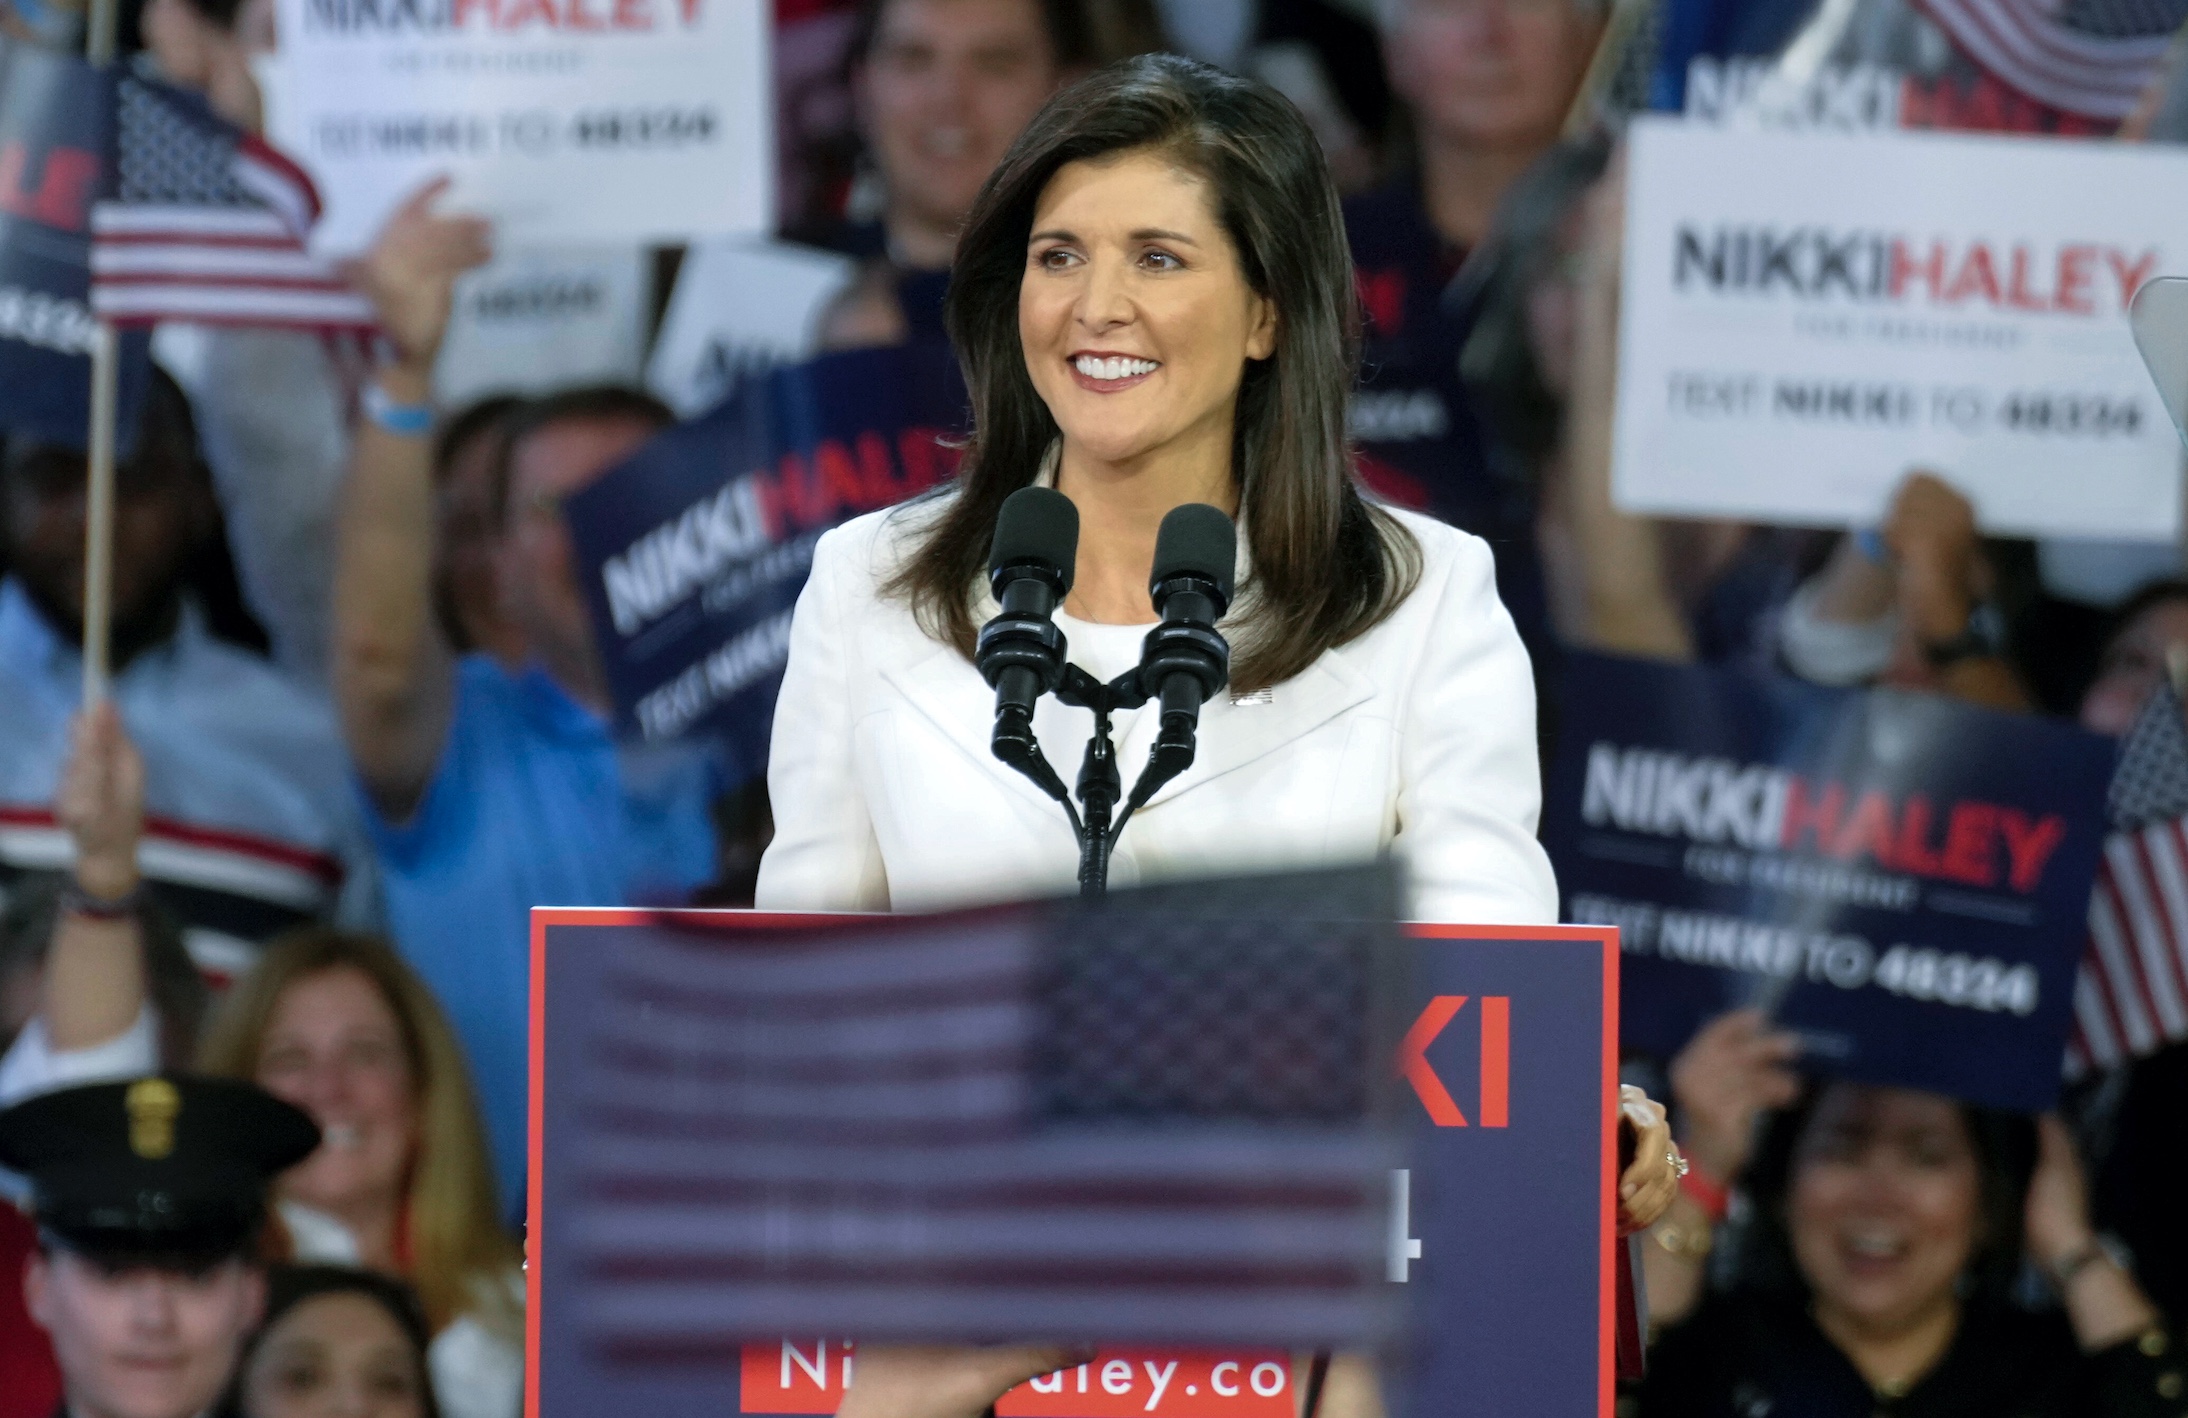 Nikki Haley’s Claim She Always Rejected The Confederate Flag Undermined By 2010 Defense